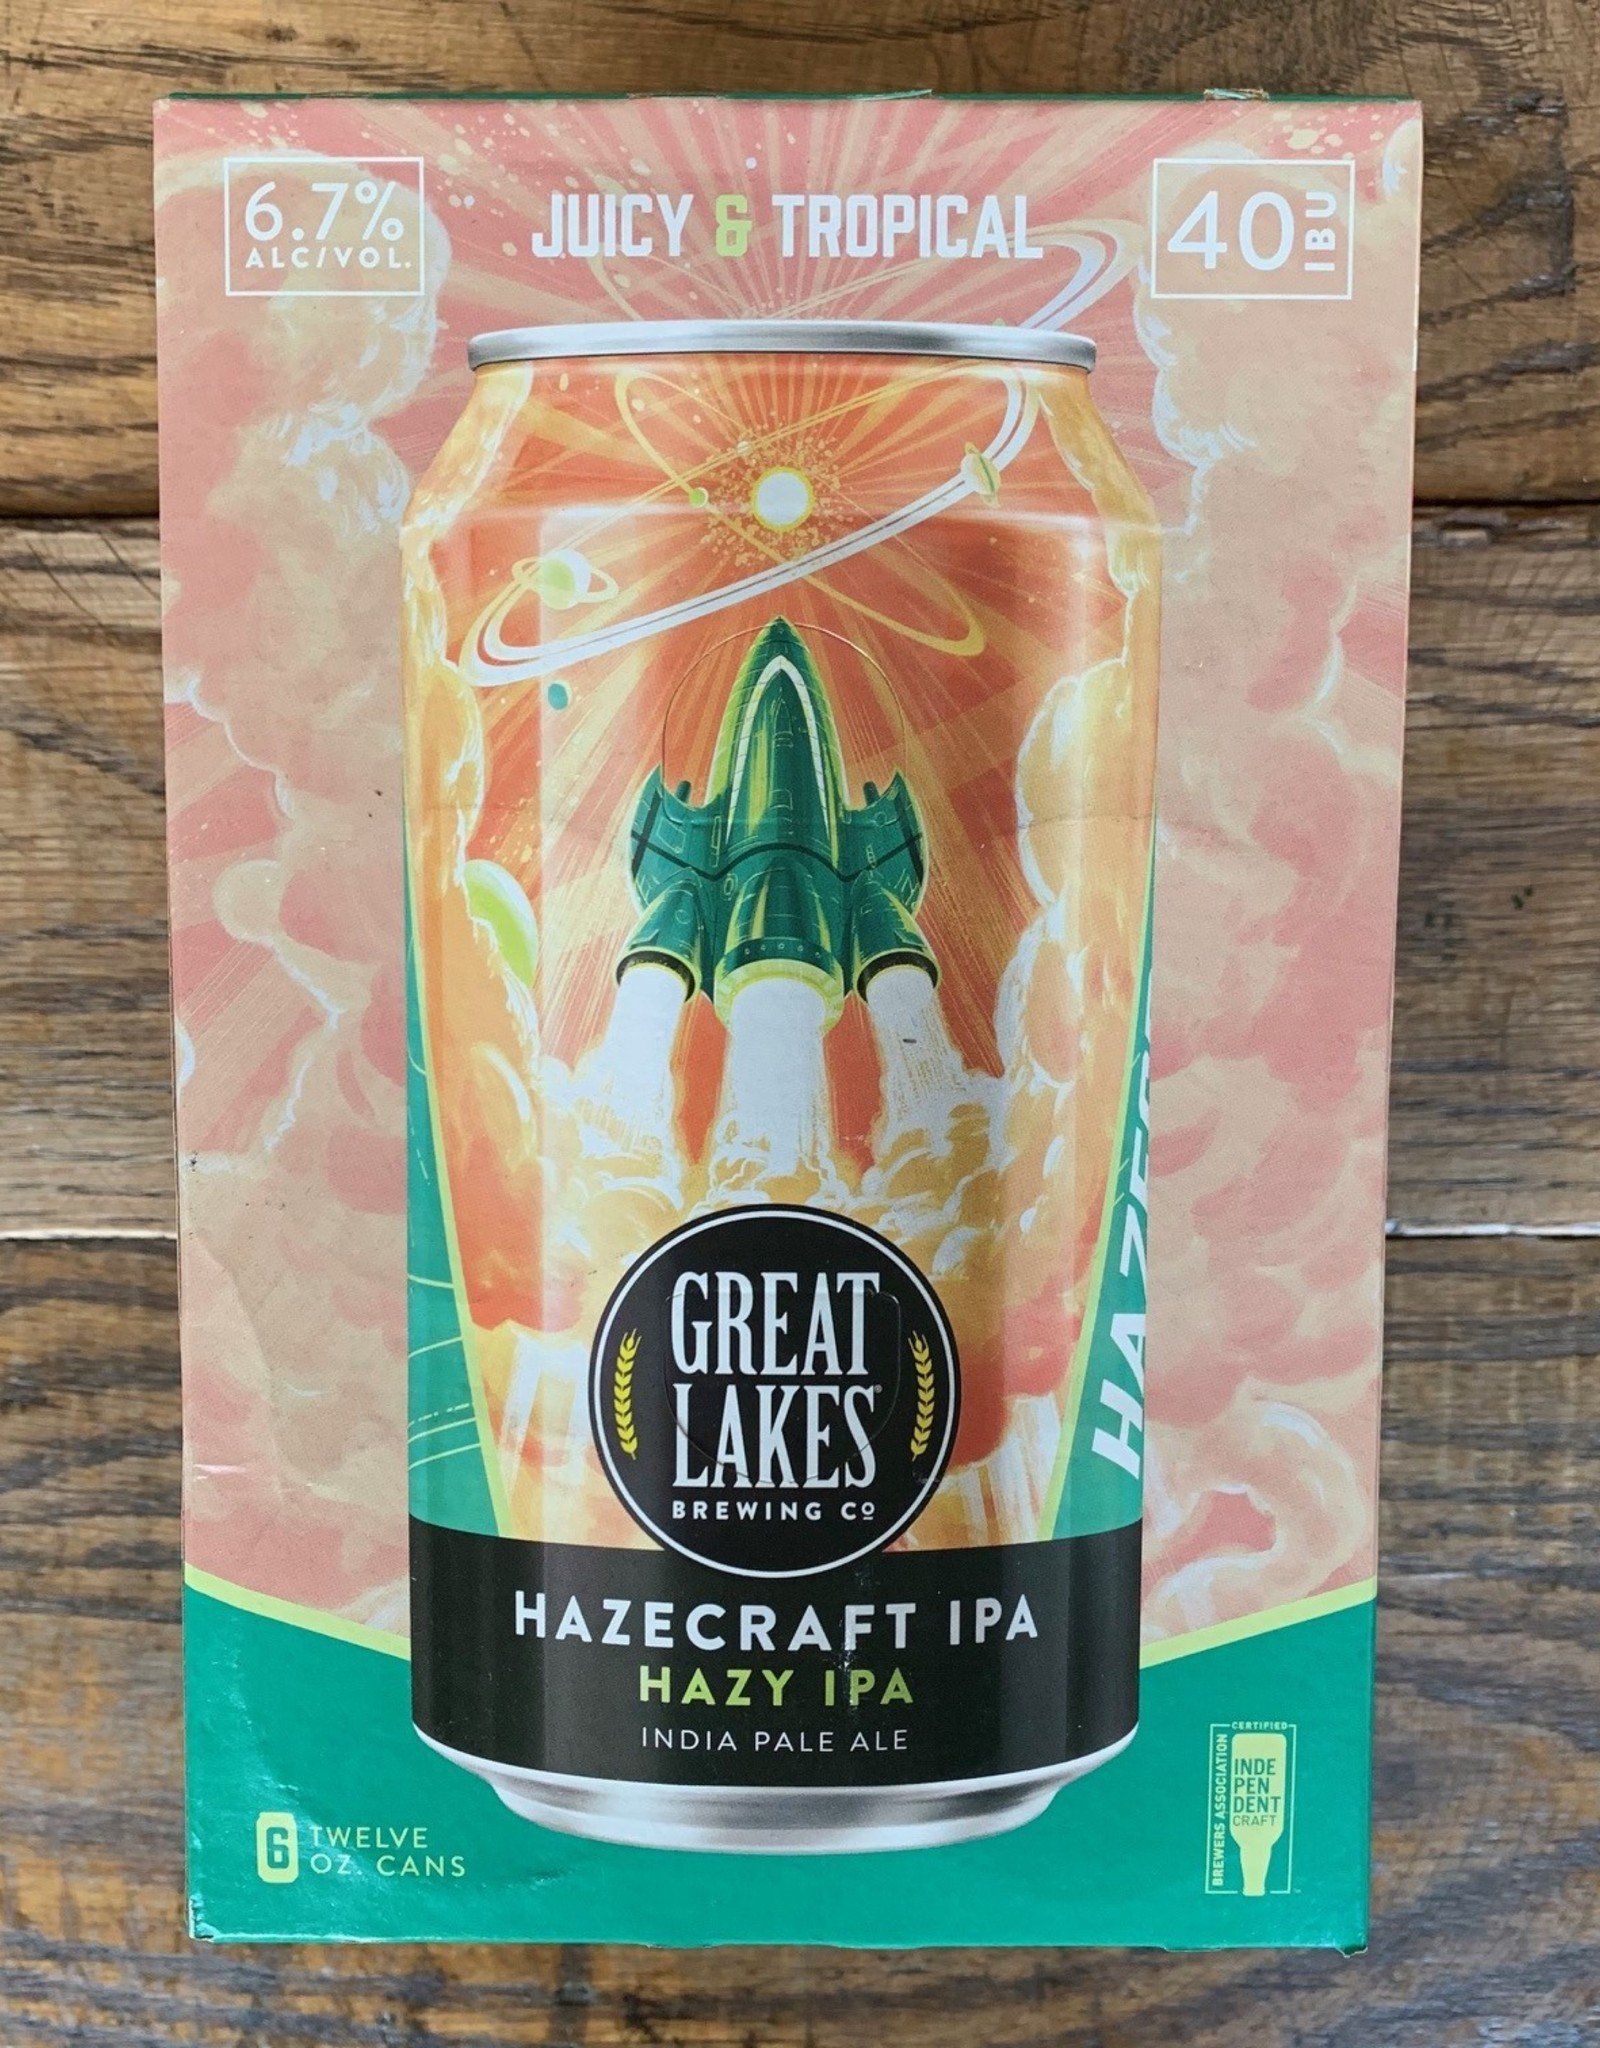 Great Lakes Brewing Co. 6 PACK Great Lakes Hazecraft Hazy IPA